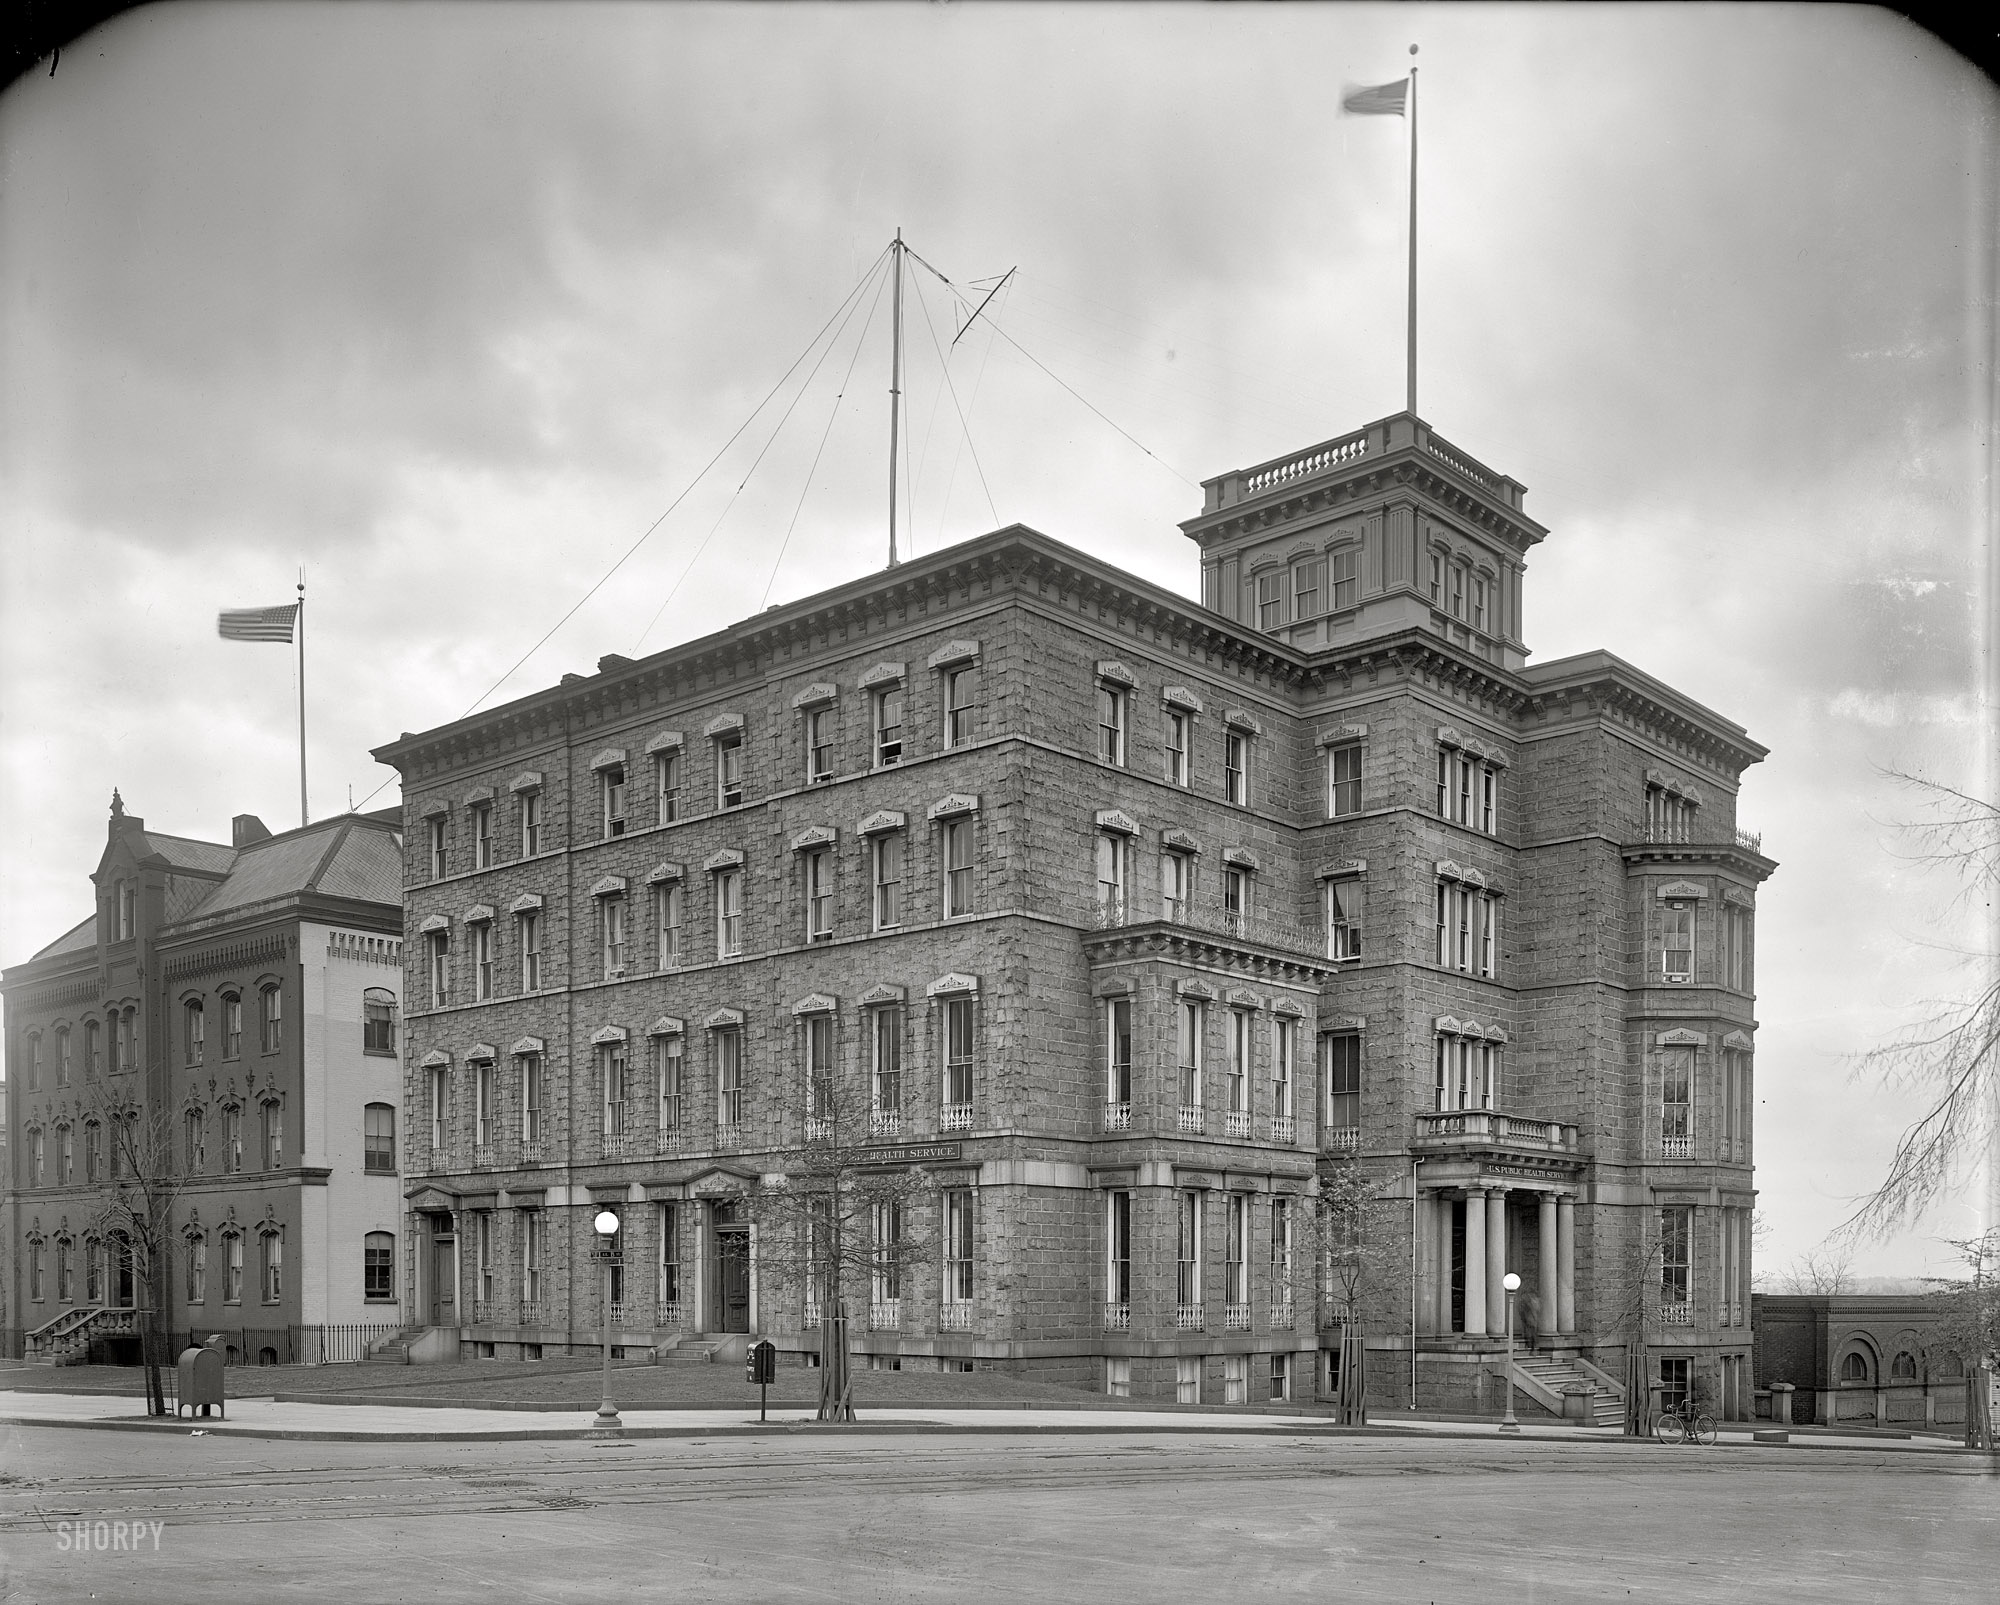 Washington, D.C., circa 1914. "U.S. Public Health Service and Geodetic Survey Library, B Street and New Jersey Avenue S.E." Where Charles Addams meets Edward Gorey. Harris & Ewing Collection glass negative. View full size.